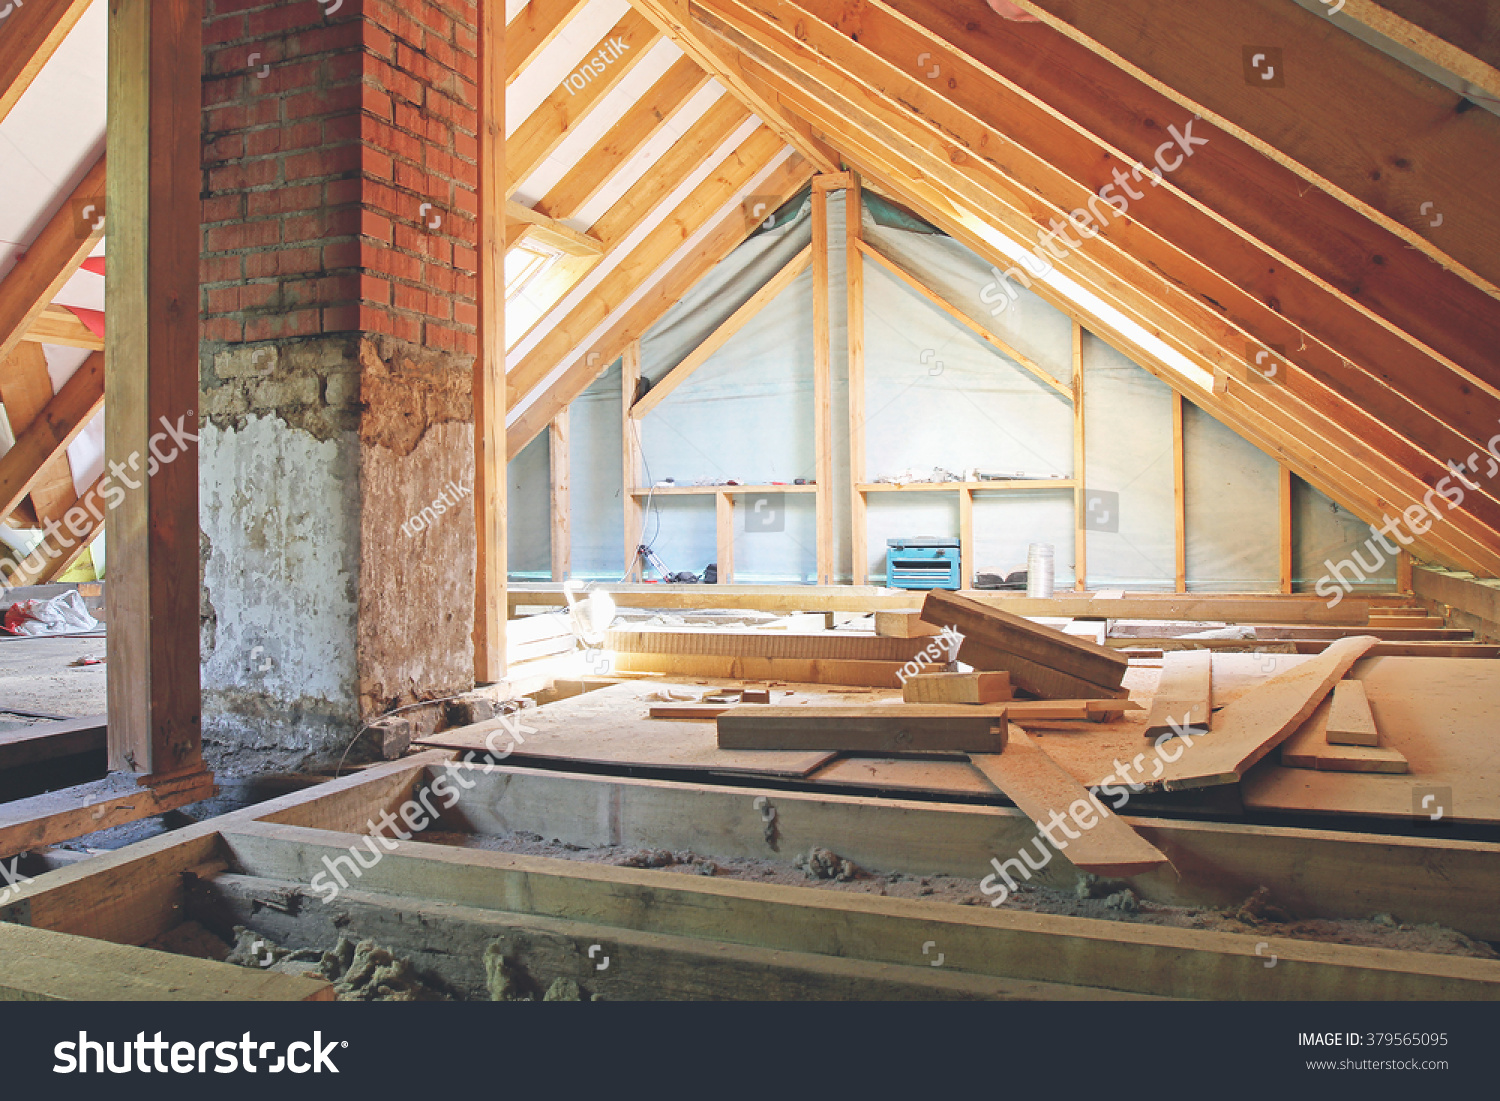 an interior view of a house attic under construction #379565095